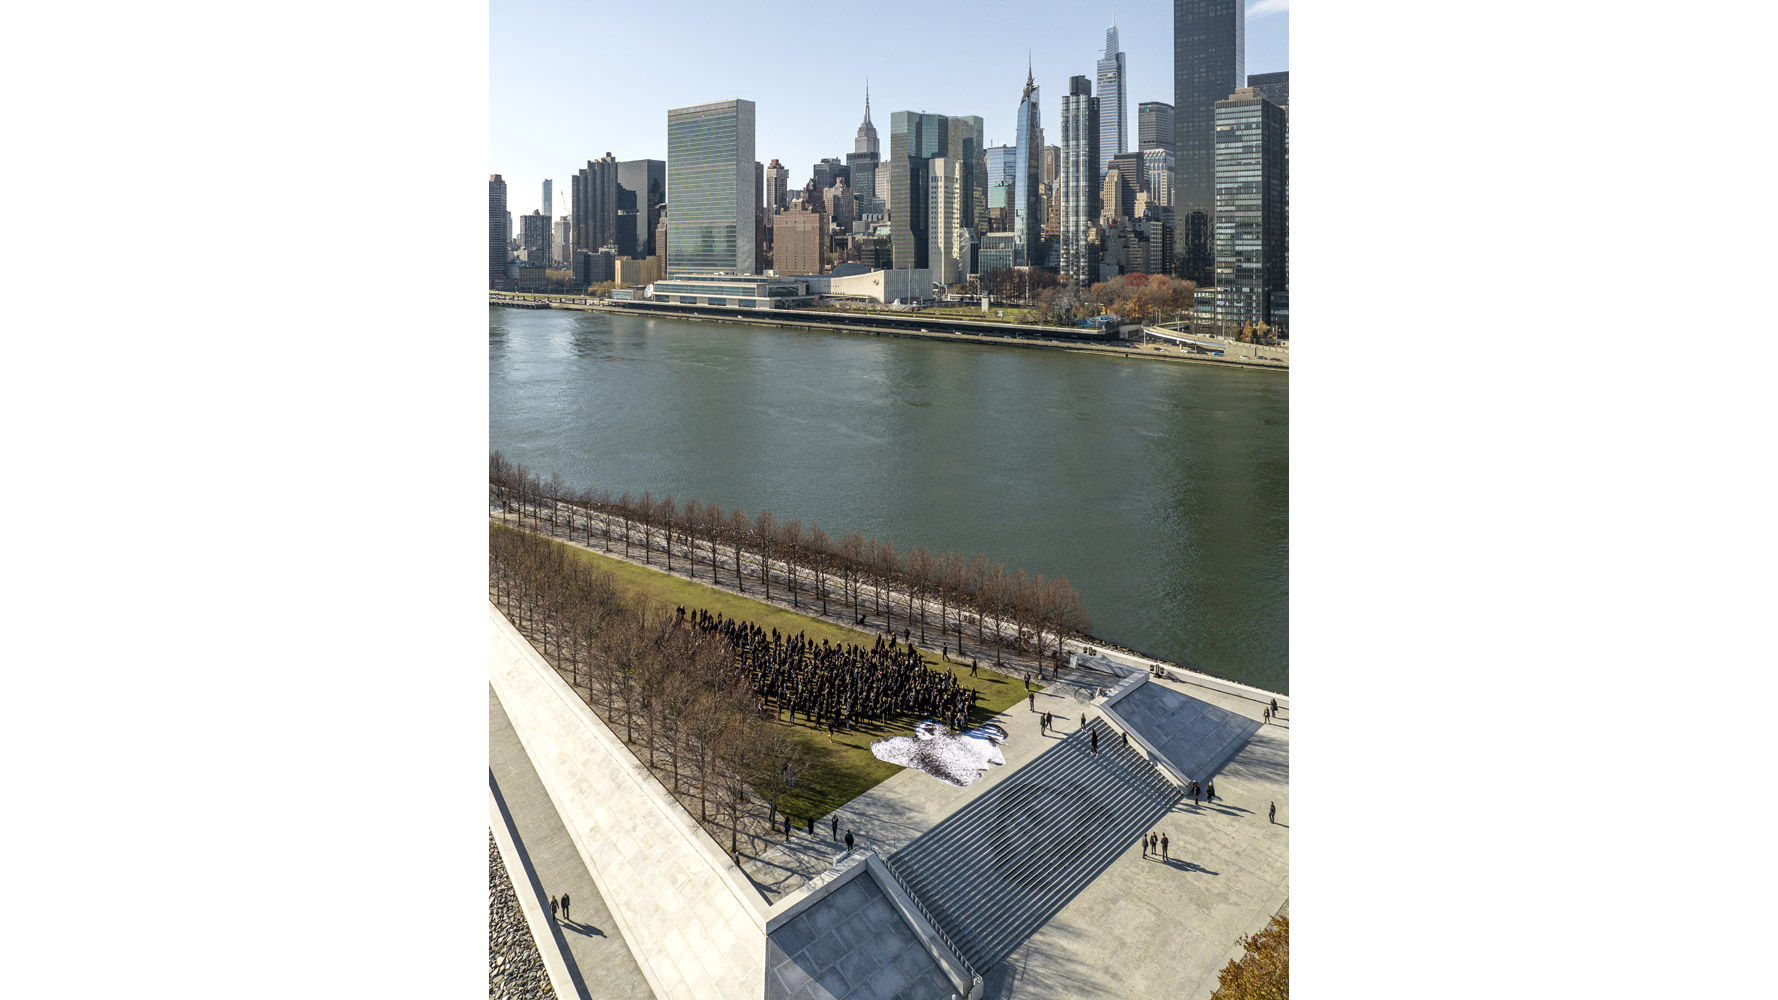 Eyes on Iran at FDR Four Freedoms Park Looks to the UN